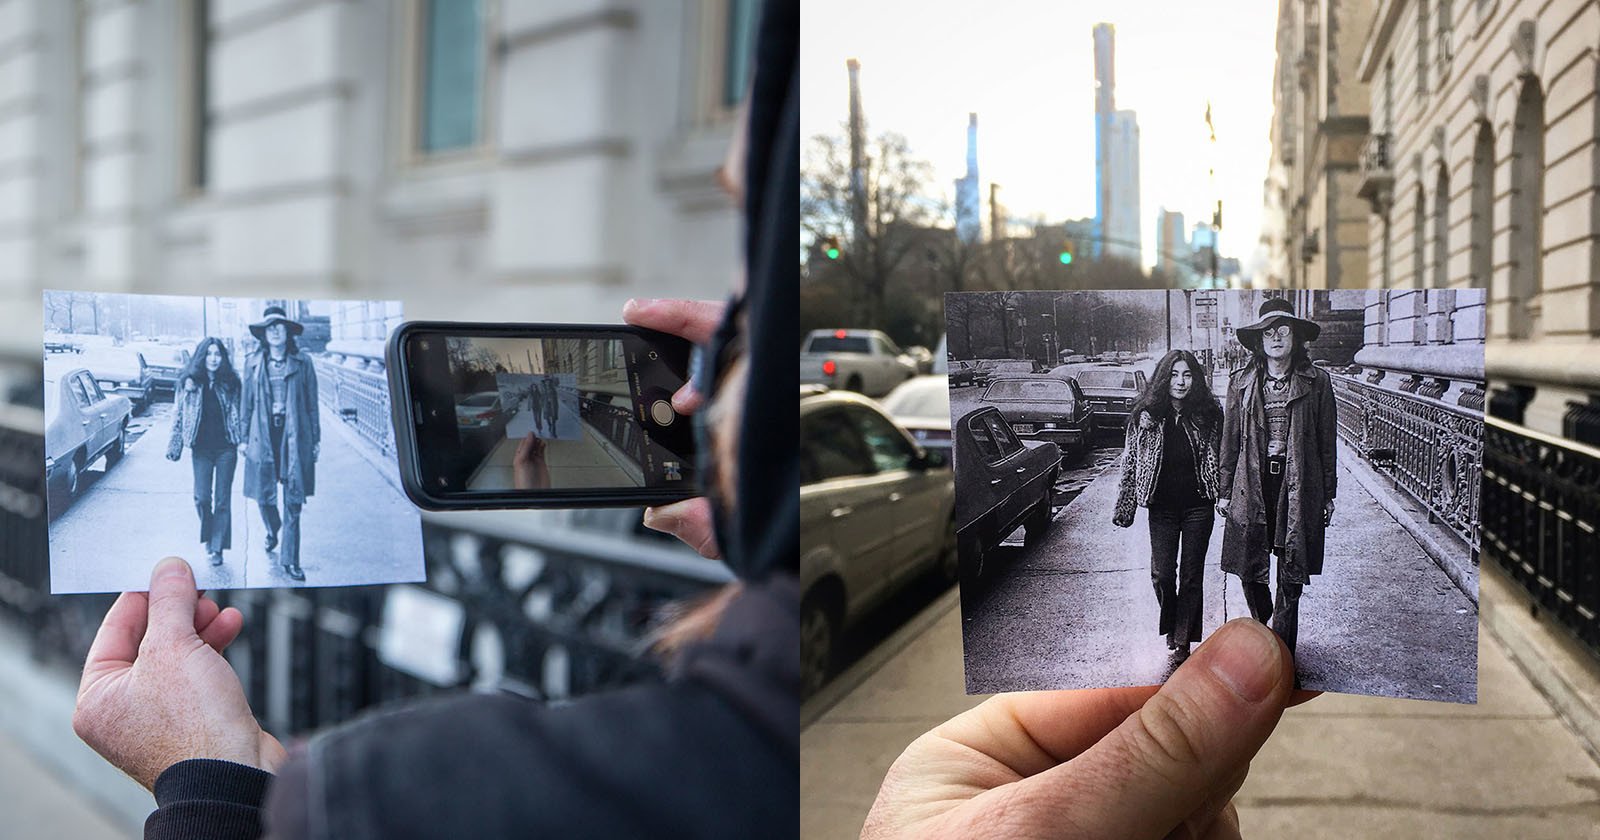 Iconic Photos of Bands and Musicians Reshot in Their Original Locations